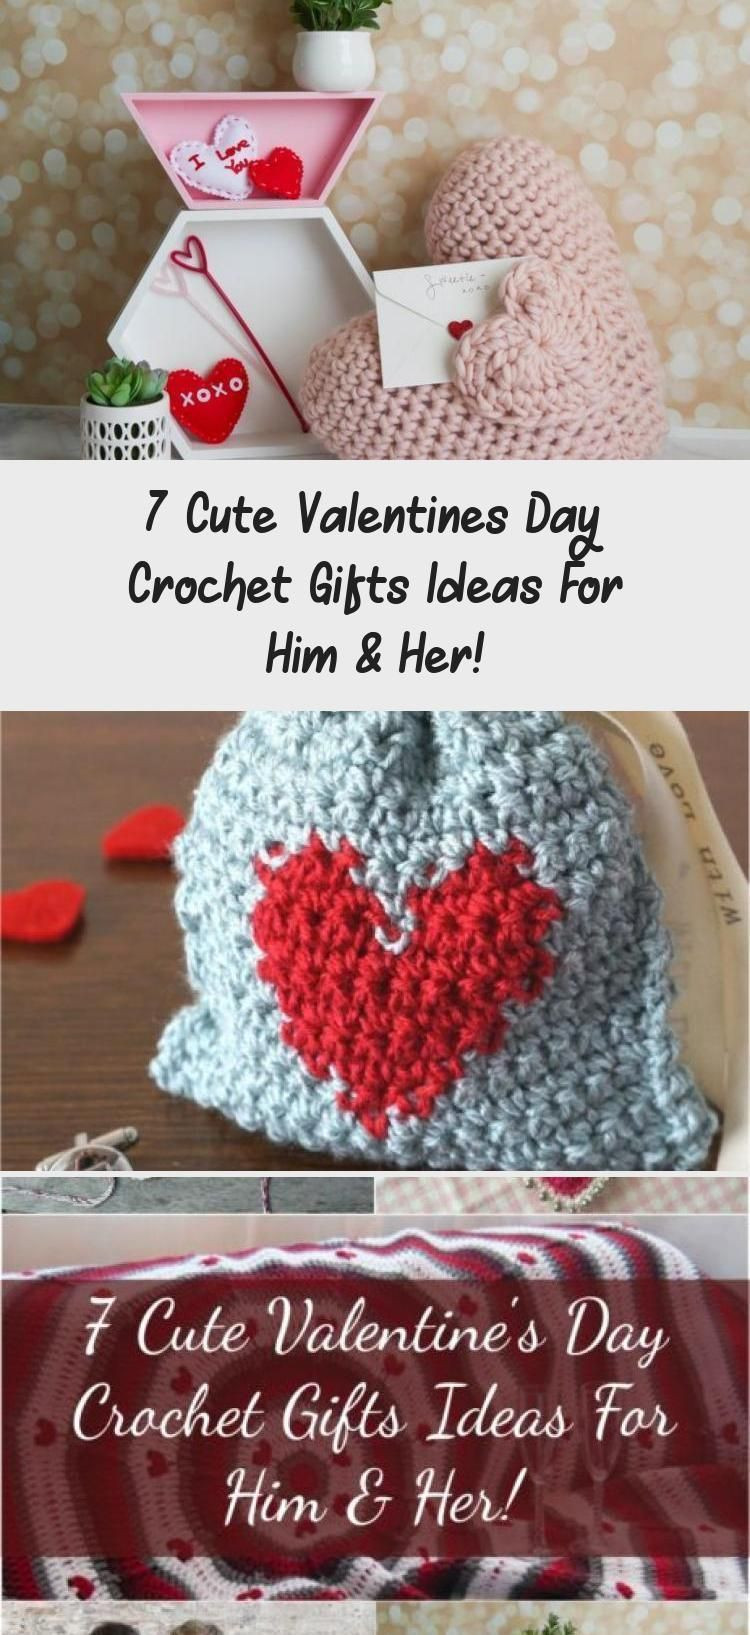 Cute Valentine Gift Ideas For Her
 7 Cute Valentines Day Crochet Gifts Ideas For Him & Her